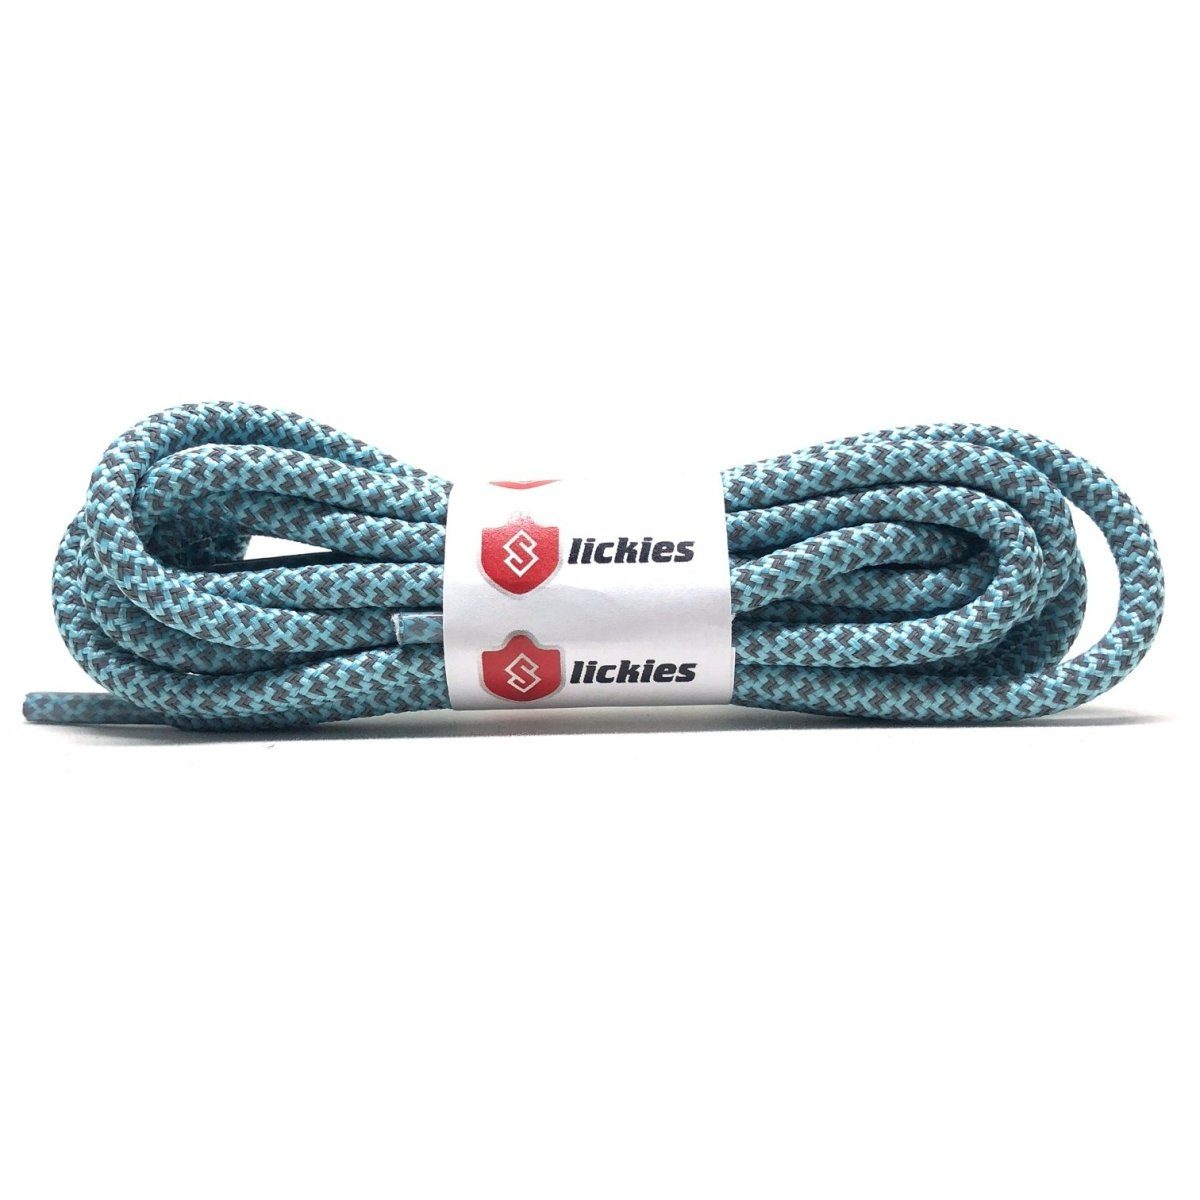  NEOTRIMS Reflective Bootlaces,Hoodie Cord Rope Shoe